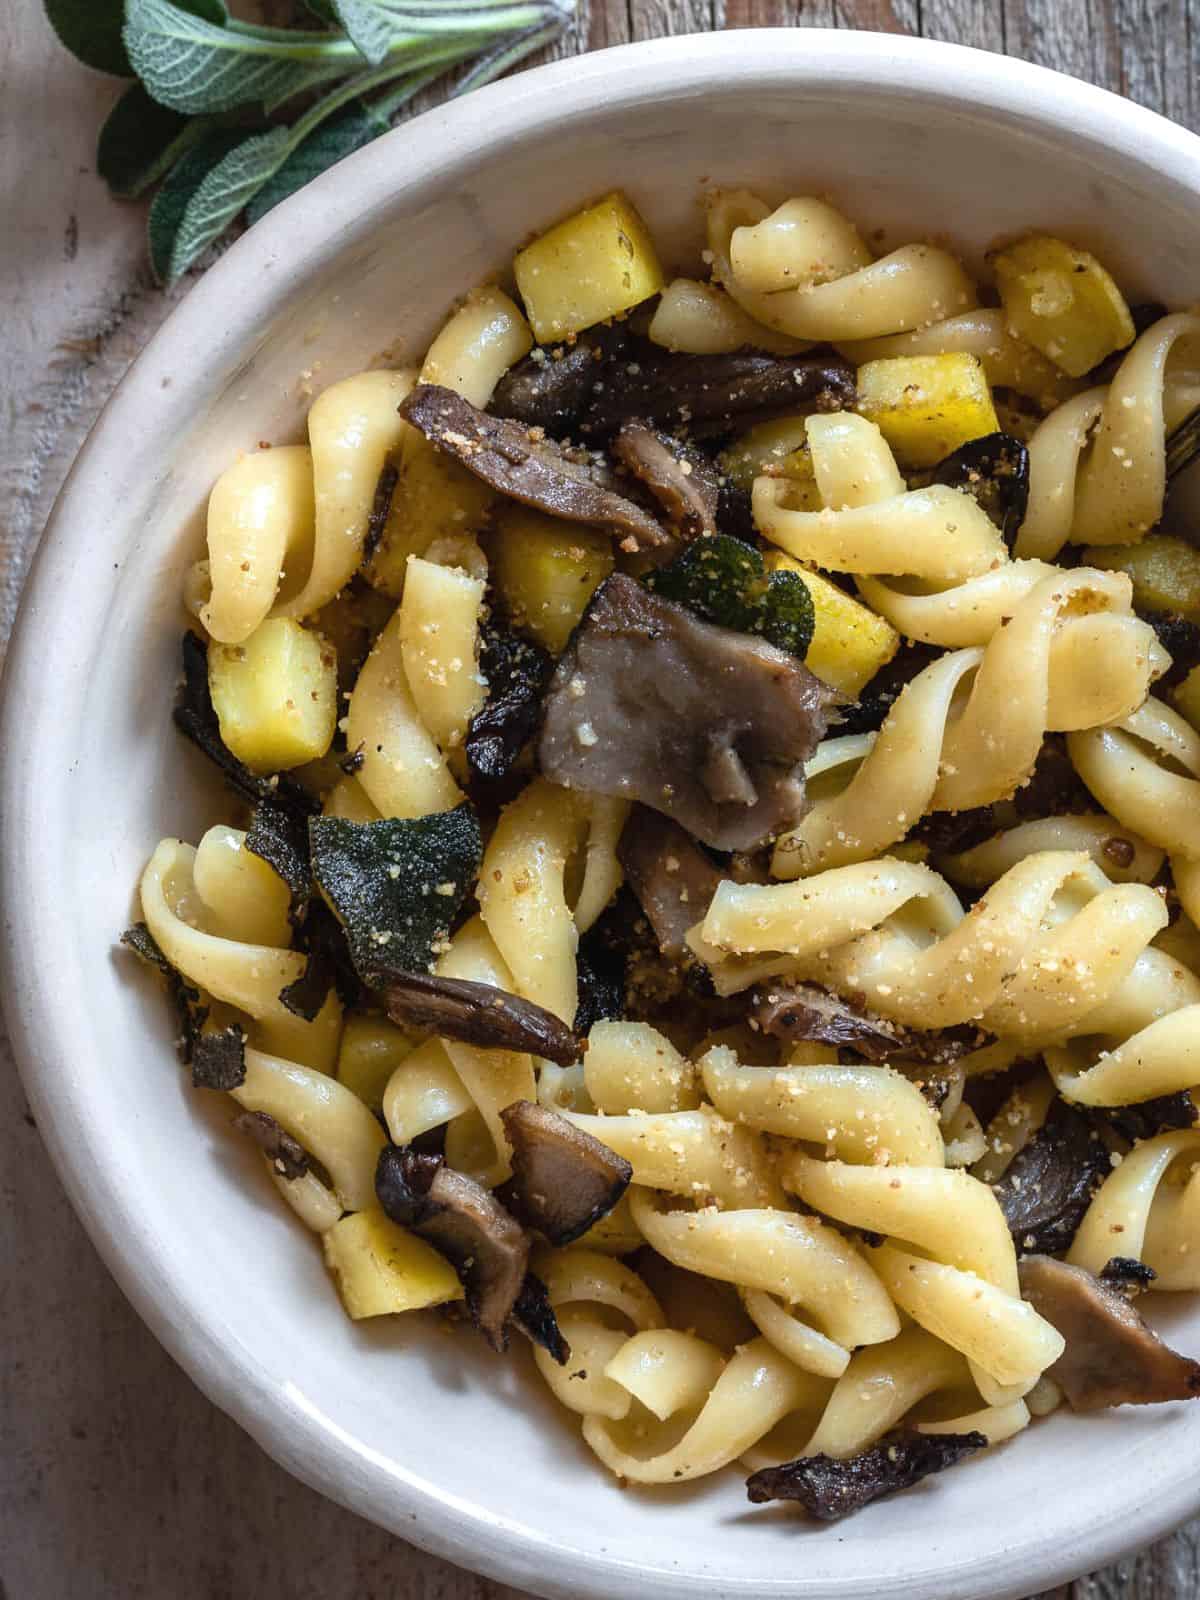 Mushrooms Pasta with Potatoes and Sage in a light bowl on a rustic wooden table. The dish shown mushrooms, potatoes and browned sage on top.